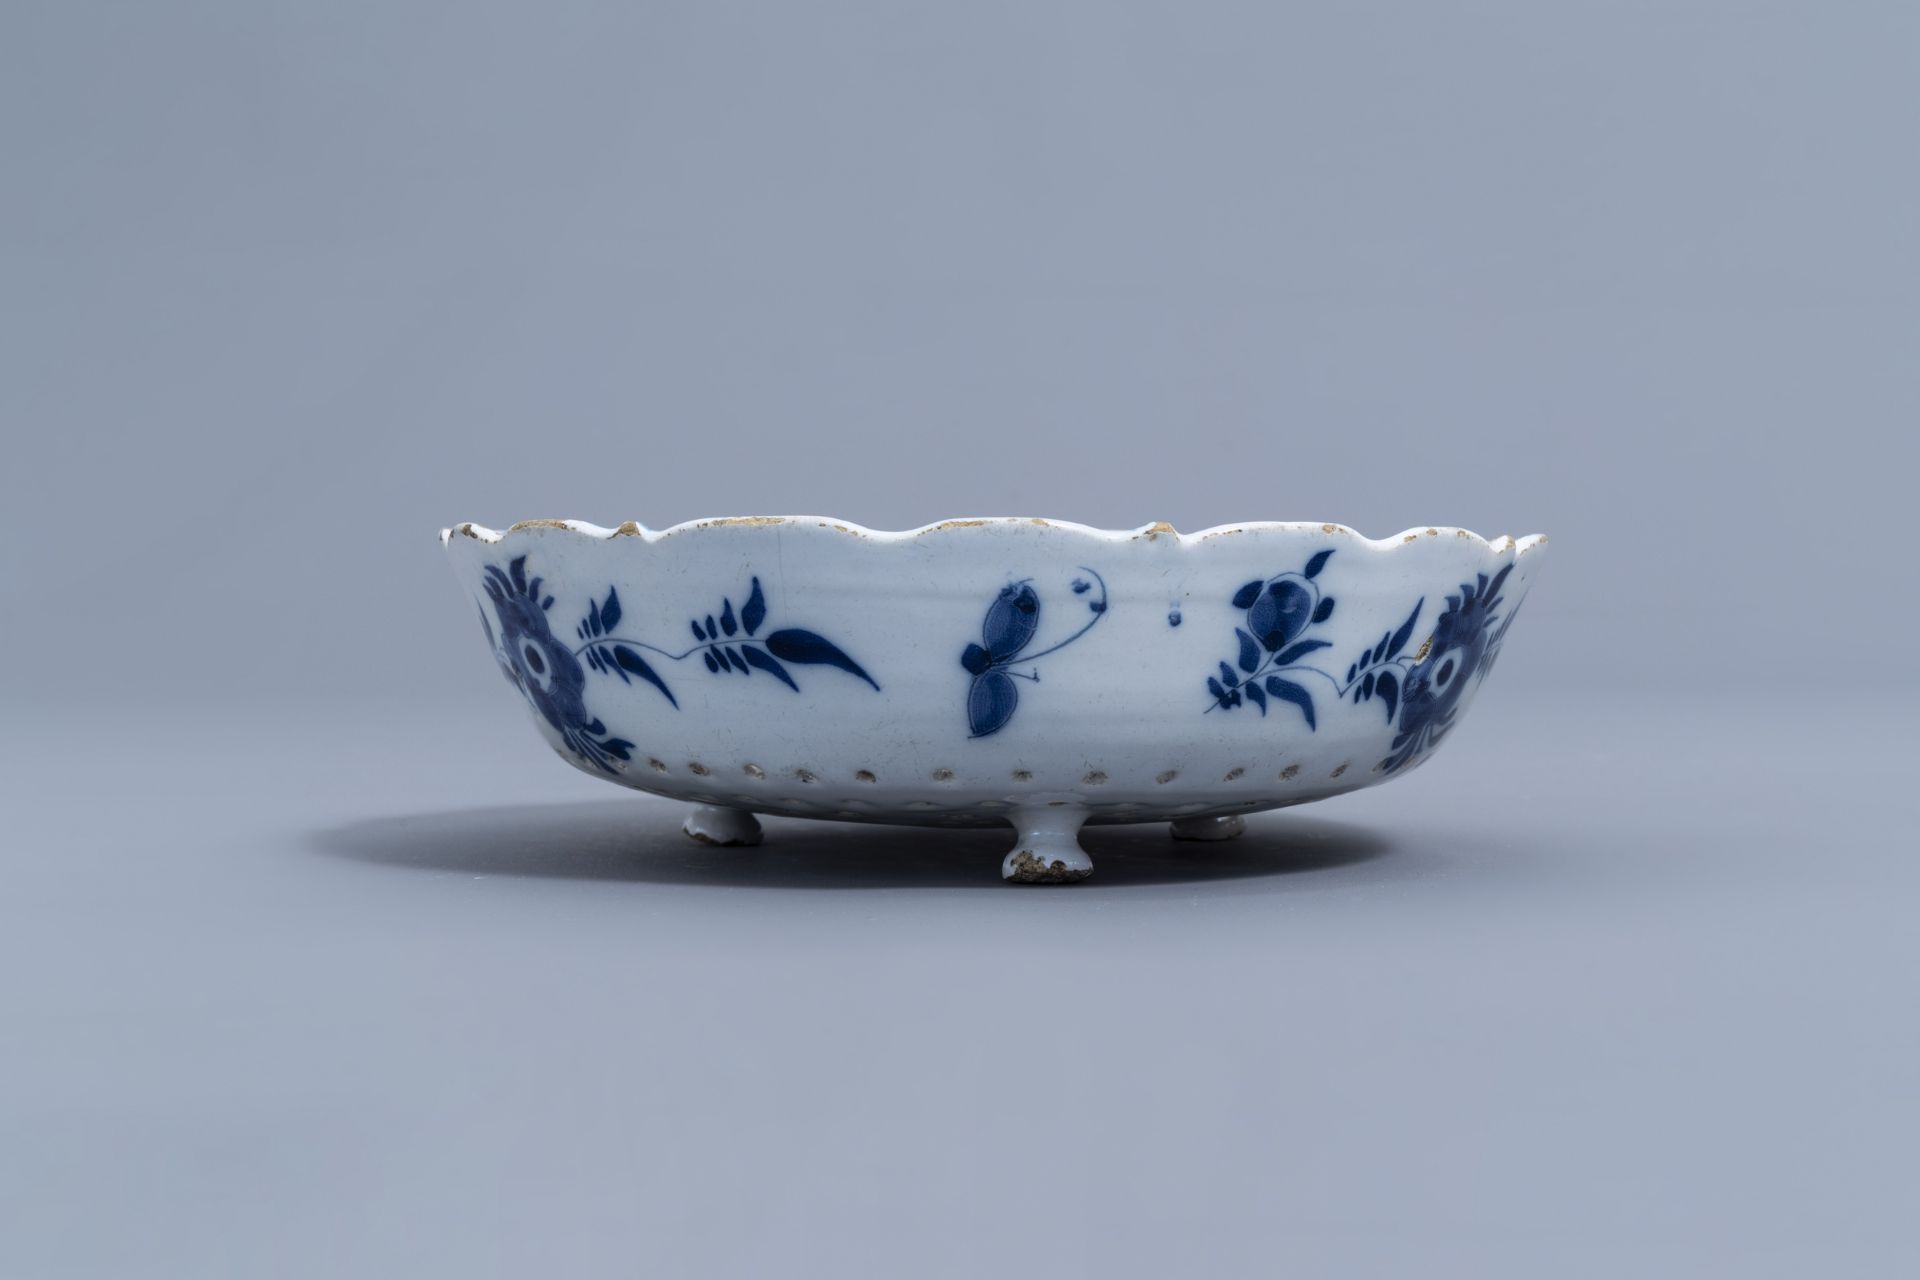 A varied collection of Dutch Delft blue and white pottery with mosty floral designs, 18th C. - Bild 12 aus 18